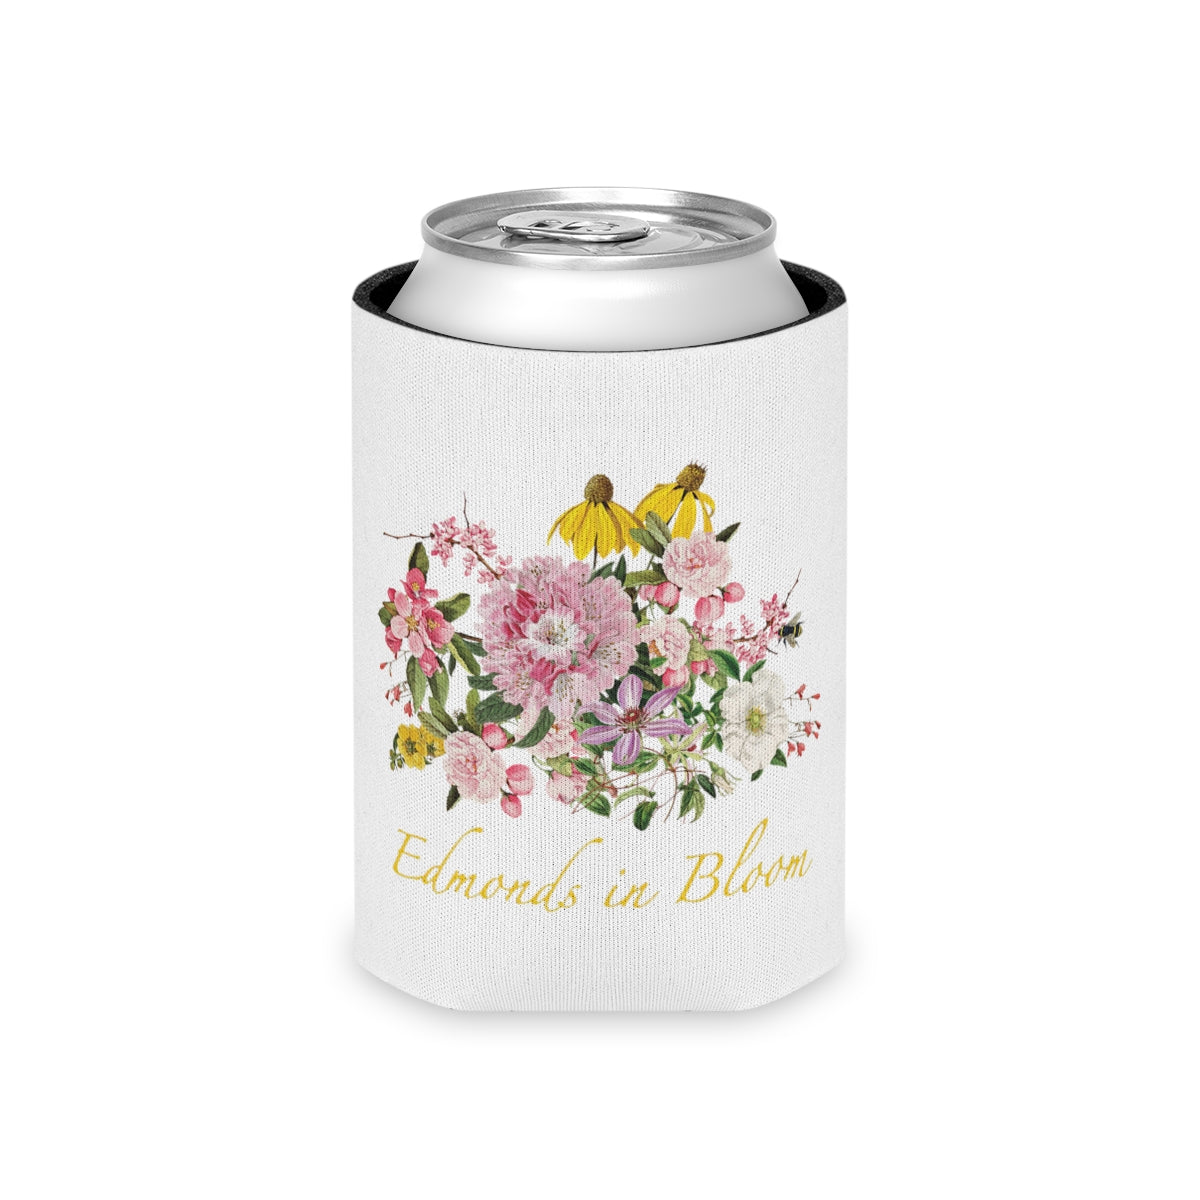 Edmonds in Bloom Can Cooler (White)